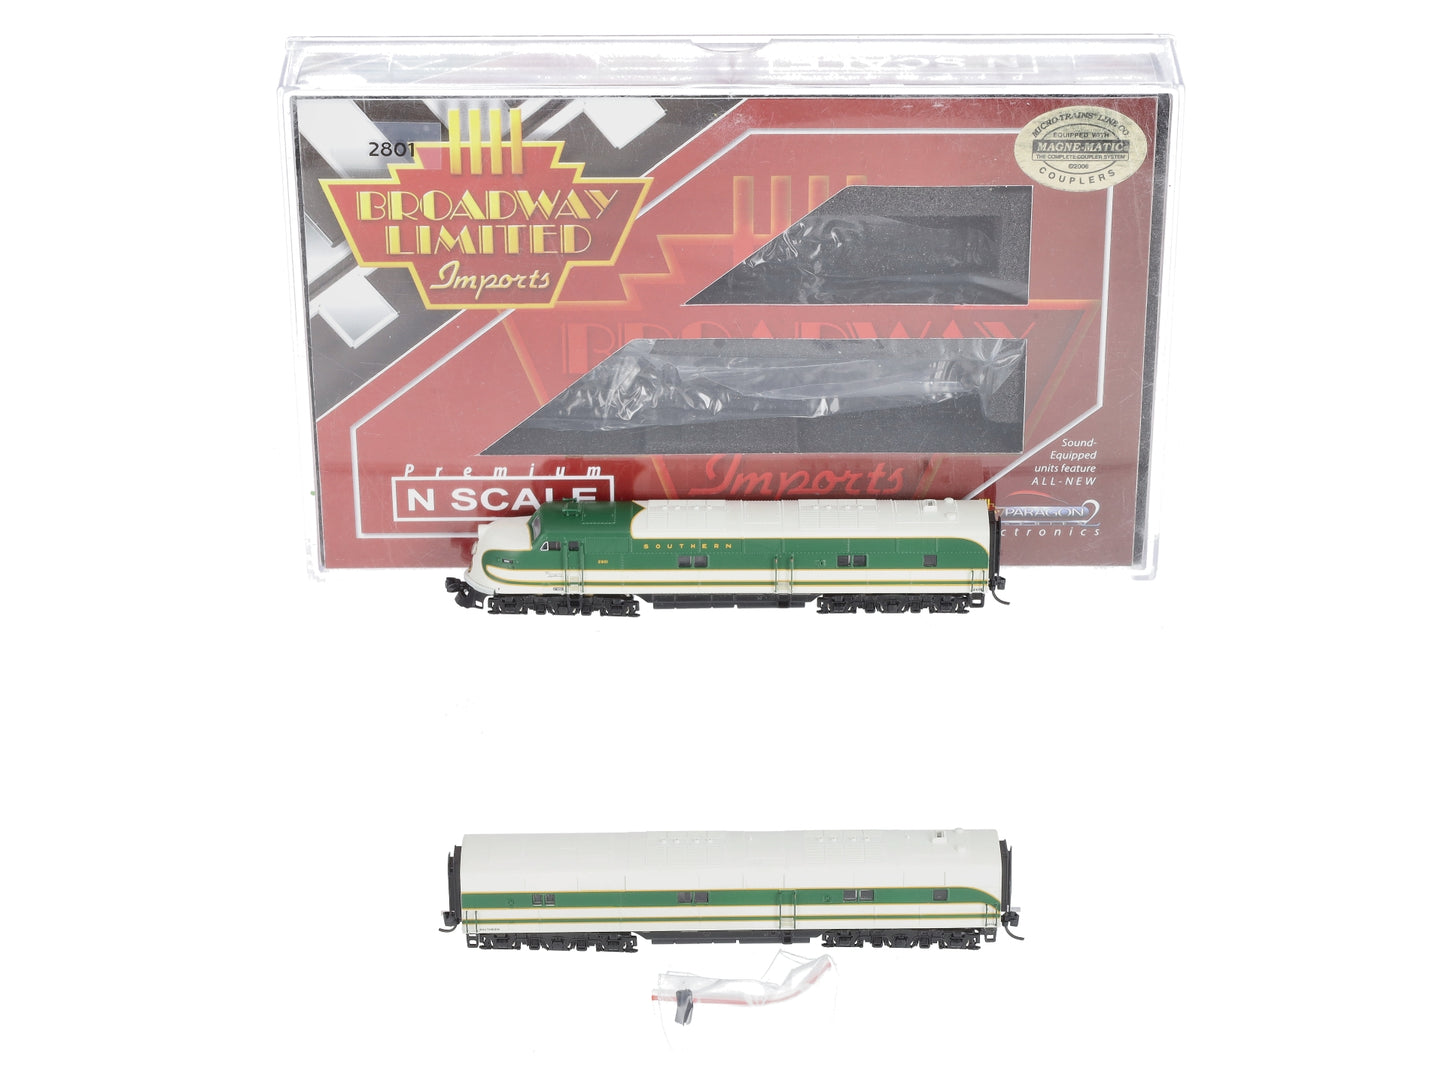 Broadway Limited 3301 N Southern Railway EMD E6 Powered A-Unpowered B